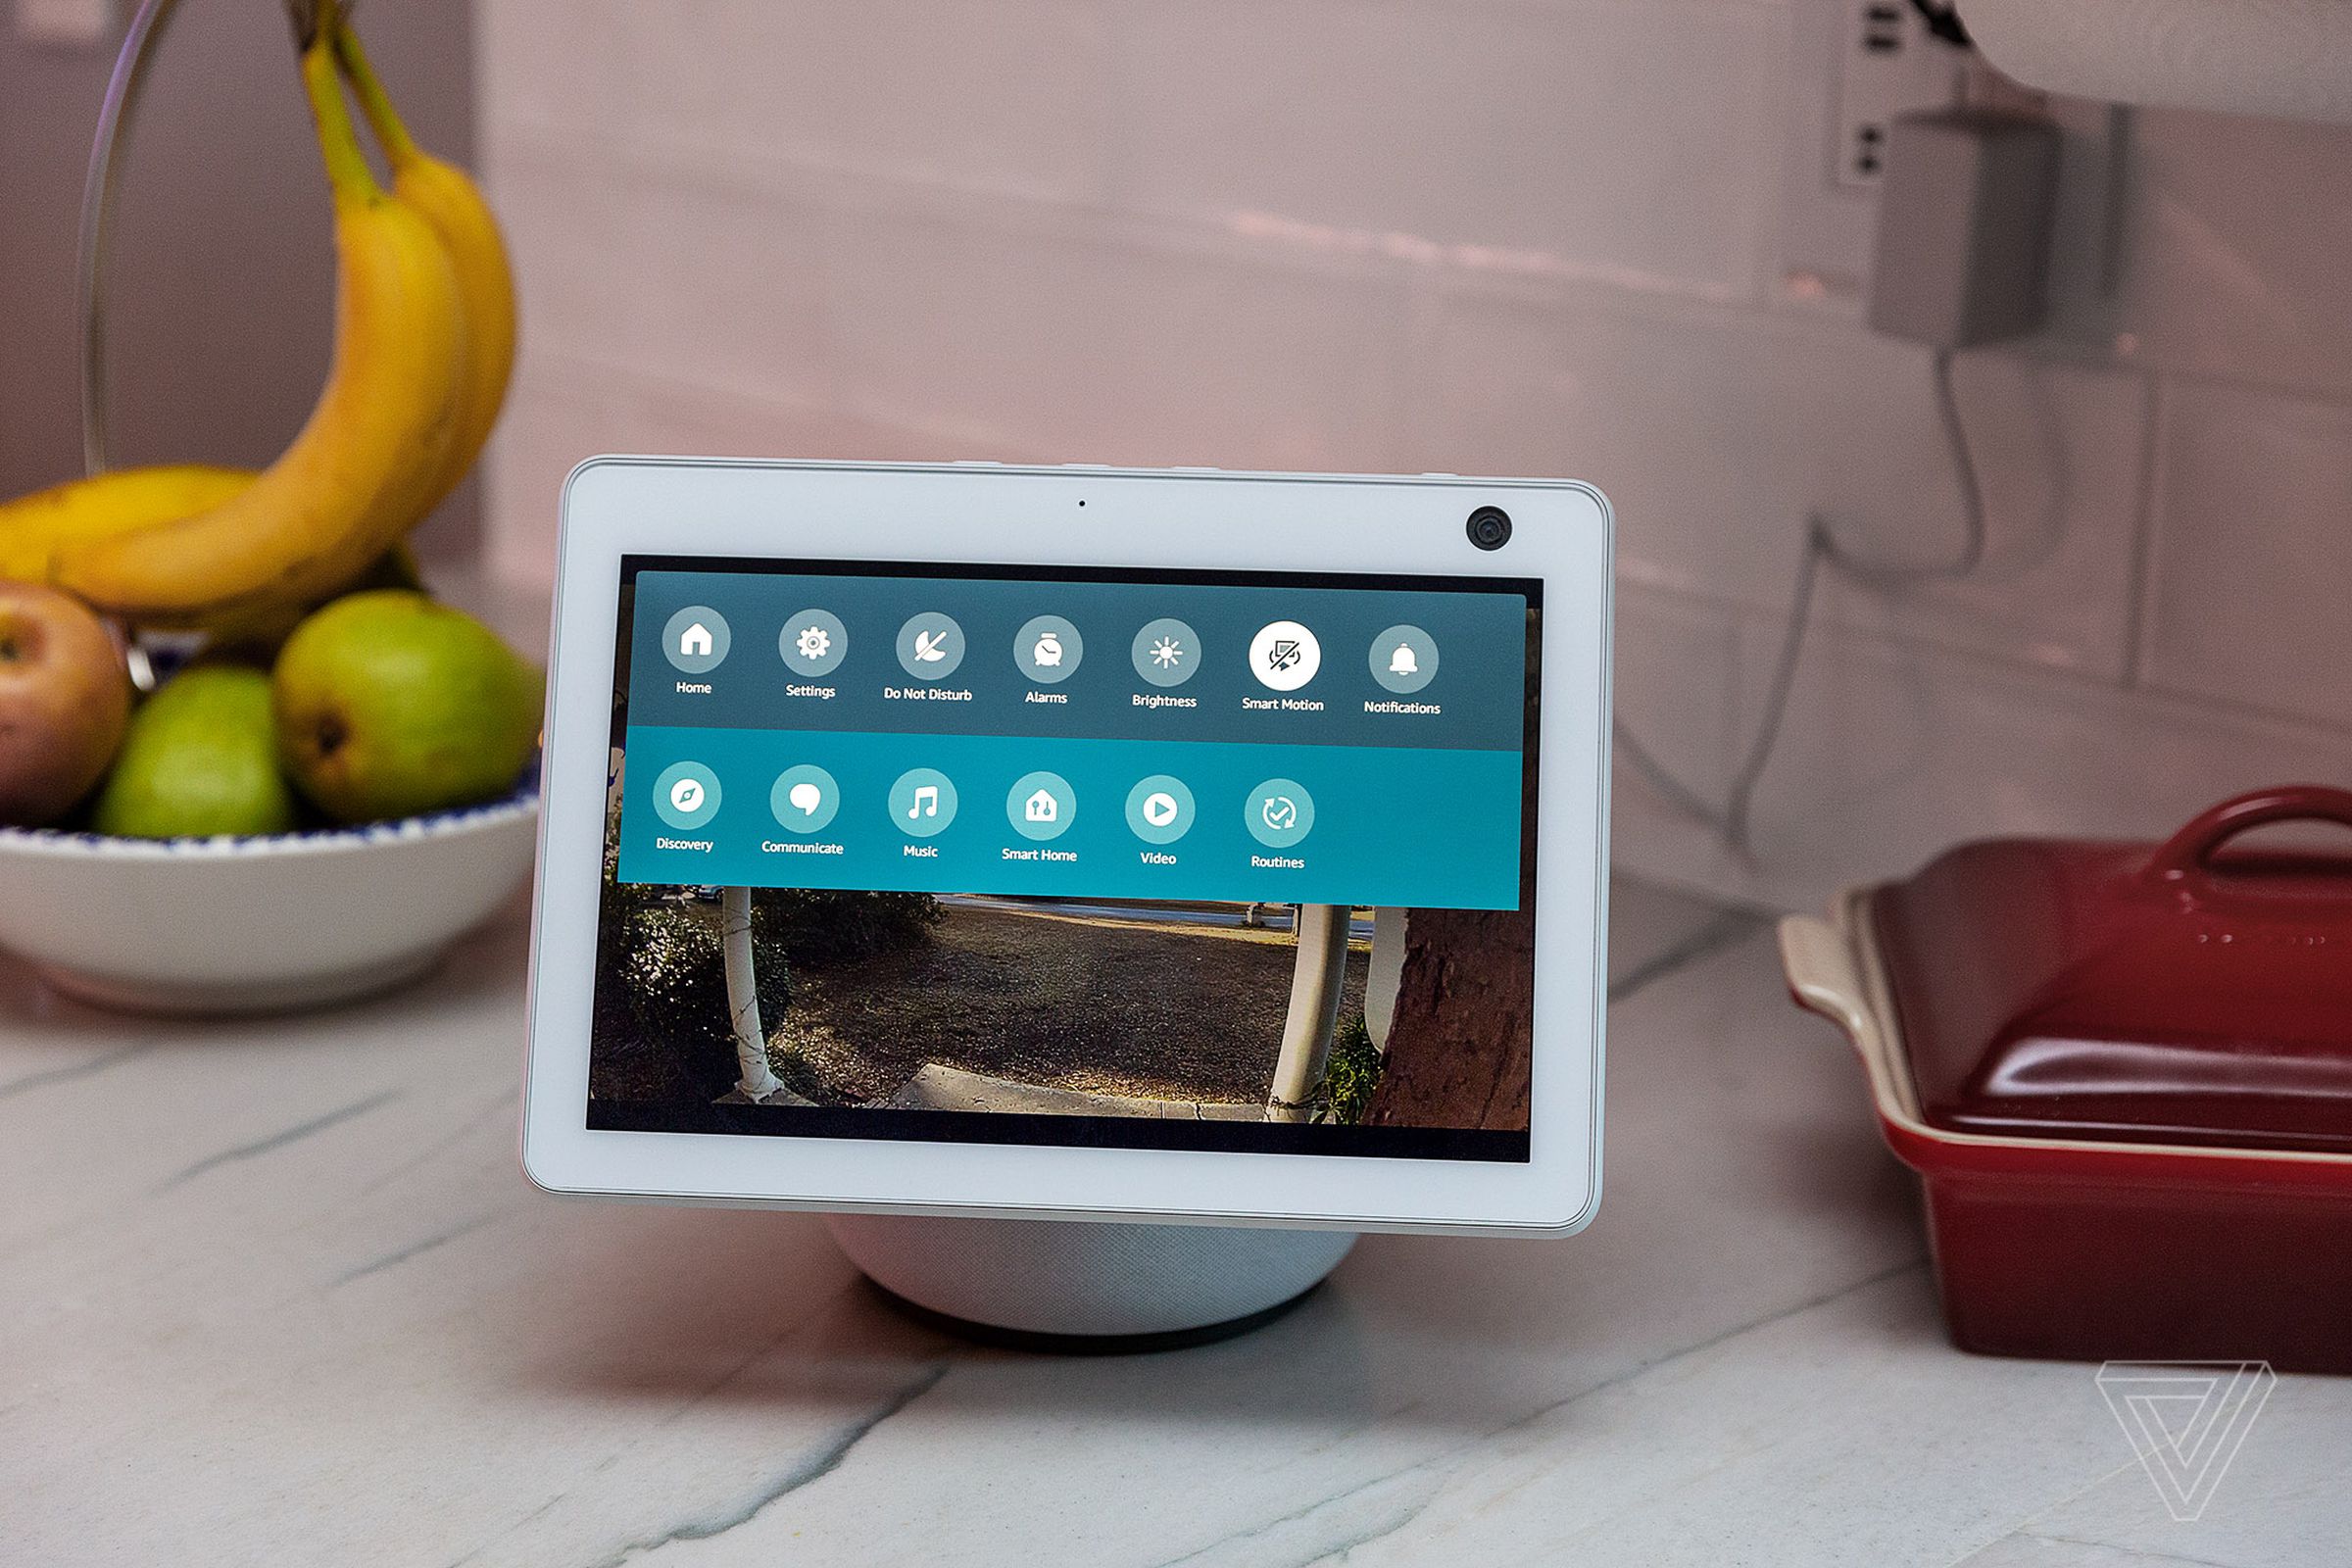 The Echo Show 10 can now stream a live view of your Google Nest Doorbell (battery), as well as announce when someone presses the doorbell.